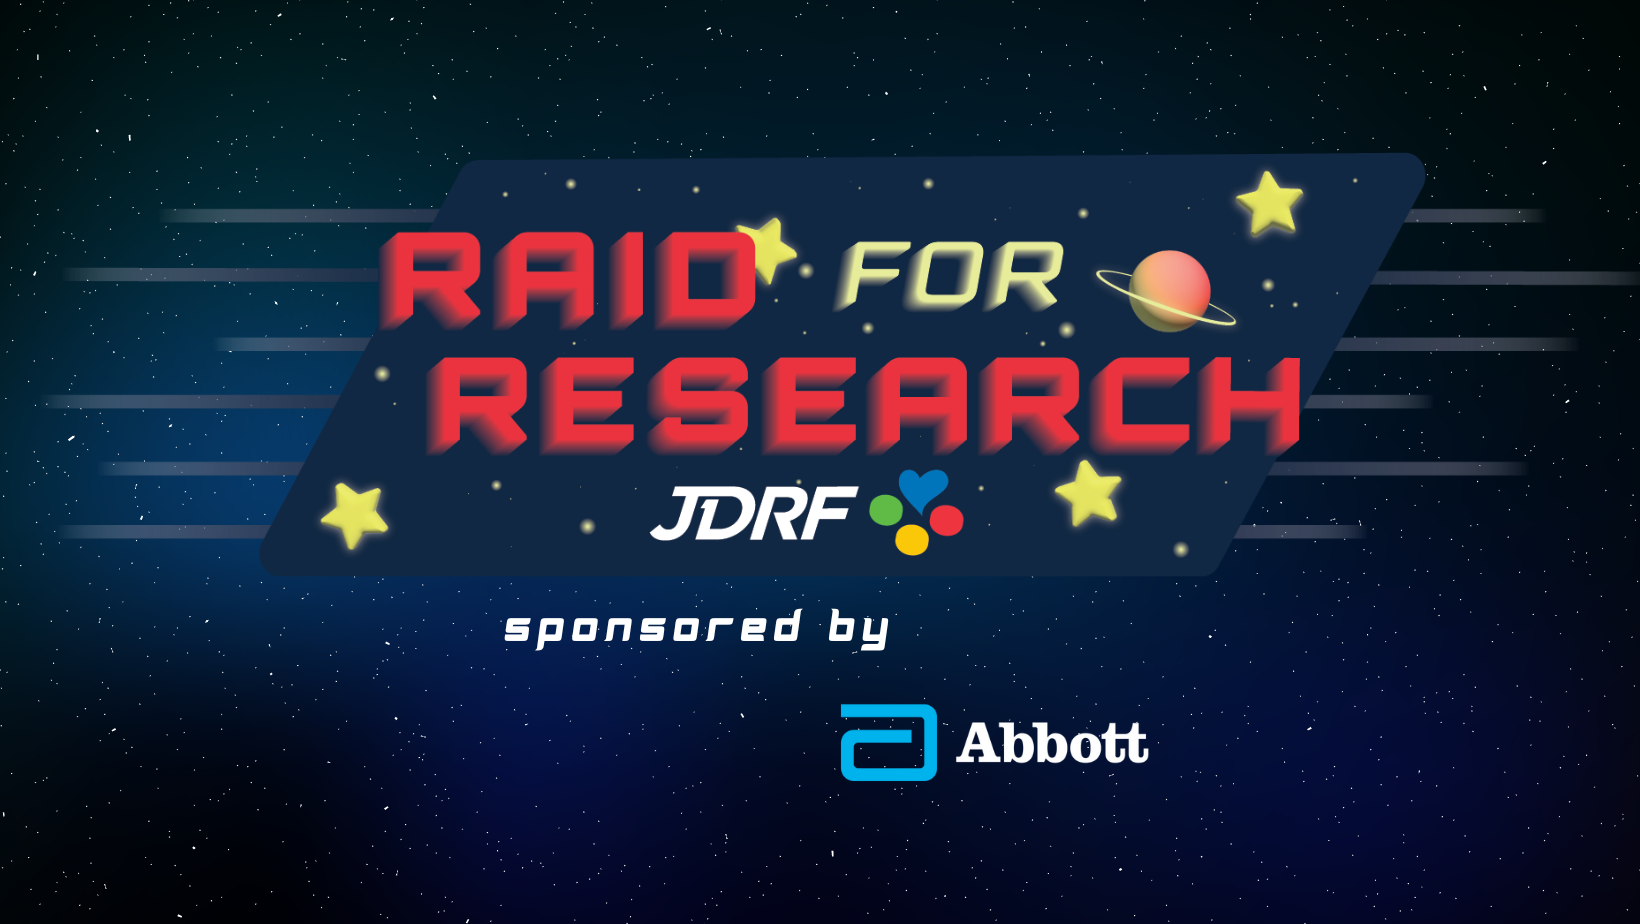 Raid for Research!